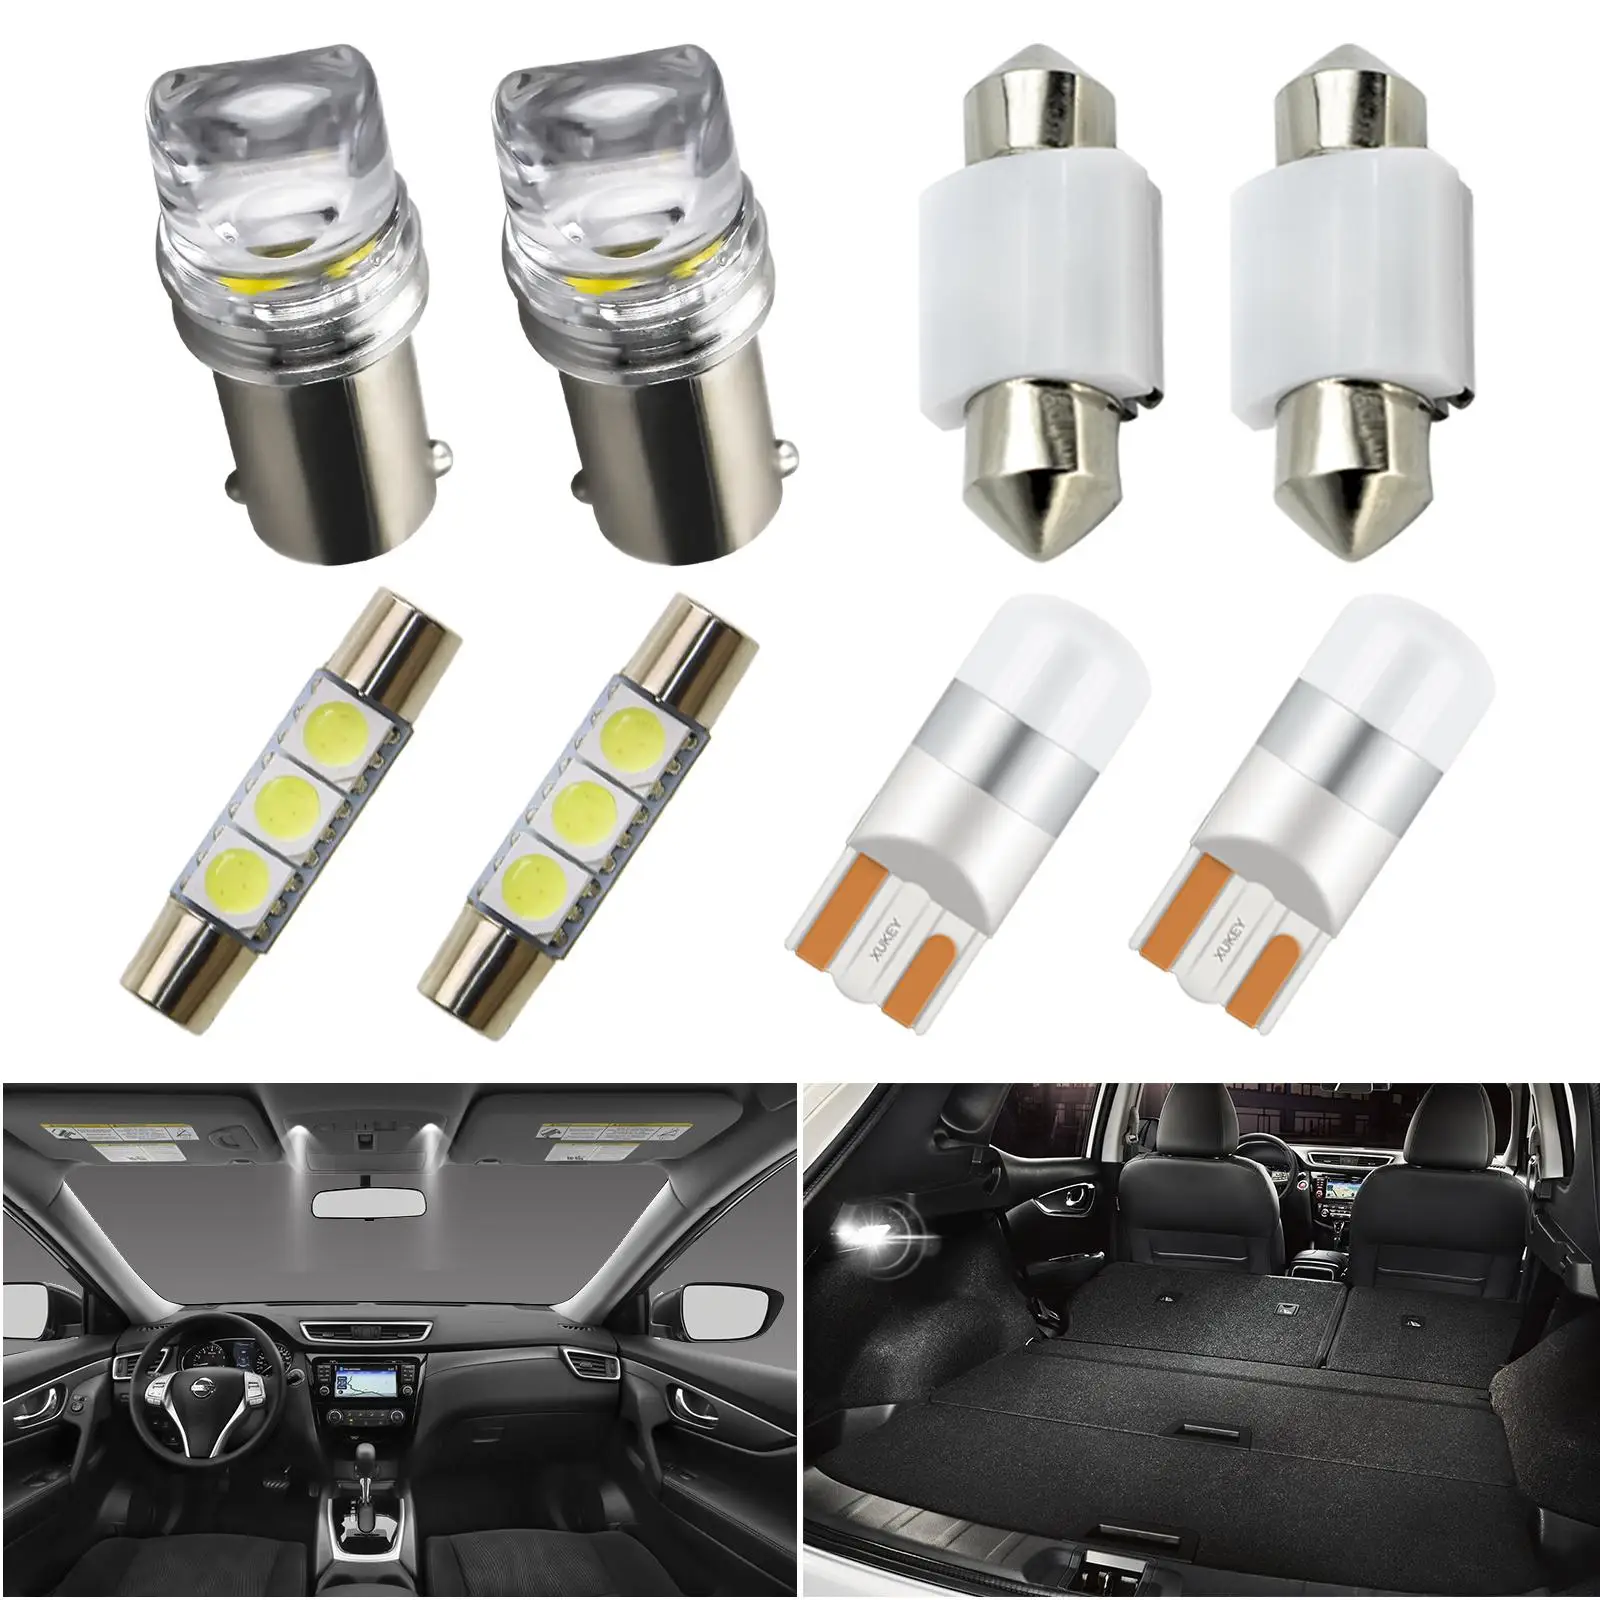 

10Pcs Car Led Bulbs Canbus Led Interior Light Kit For Nissan X-Trail 2007 2018 Rogue T30 T31 T32 Dome Trunk License Plate Lamp